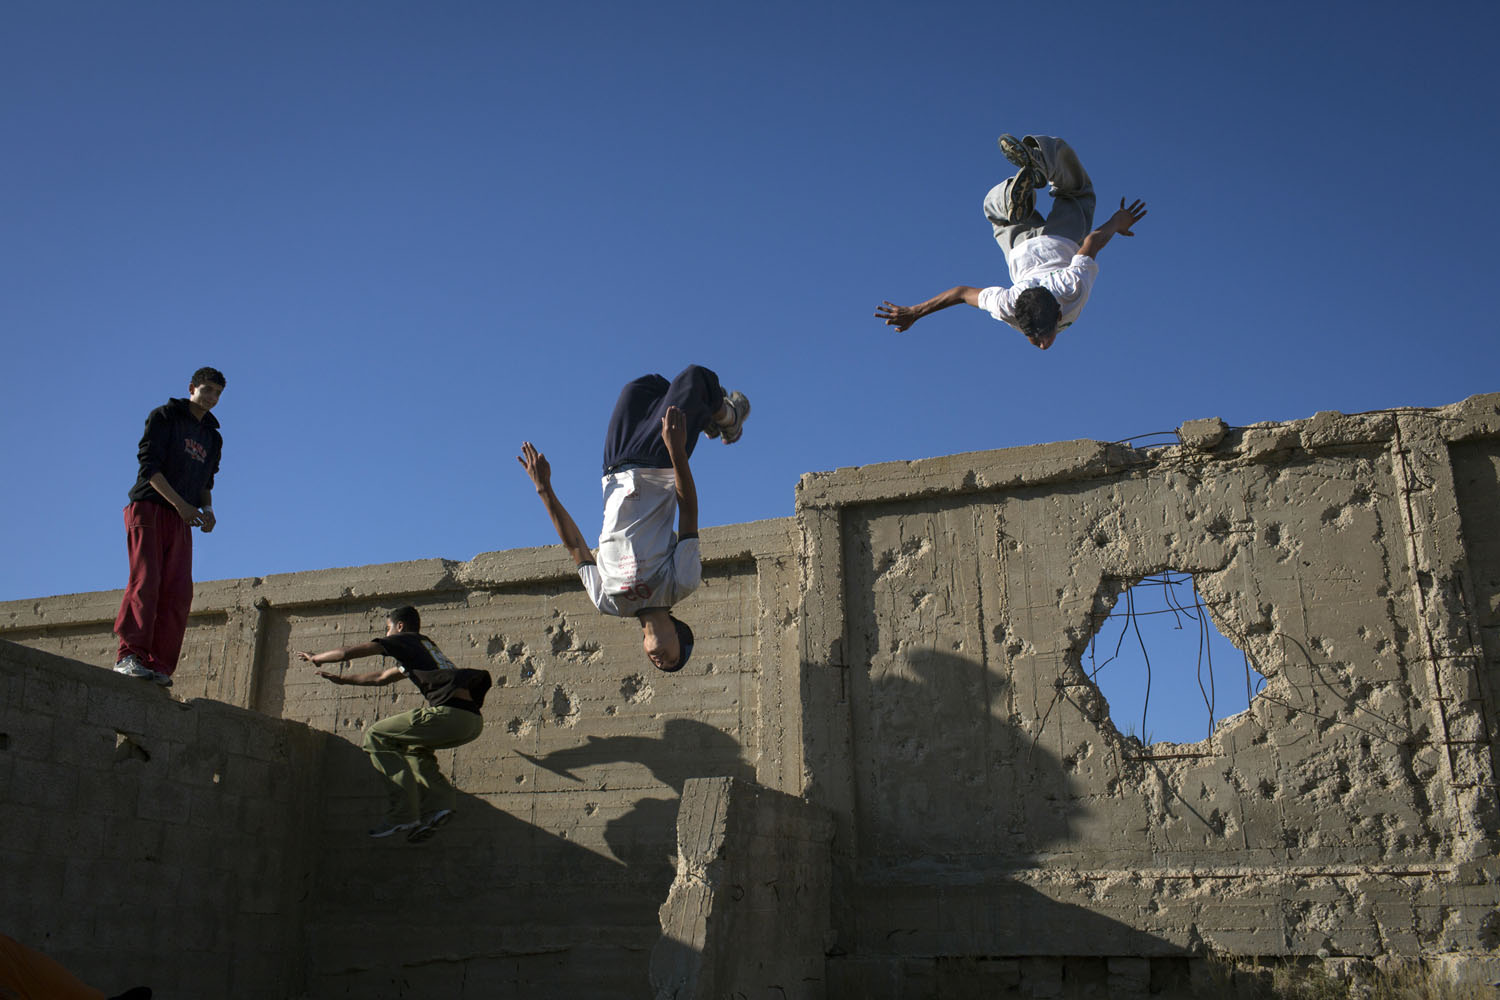 The Gaza Parkour team practices in a cemetery  on the outskirts of their refugee camp in Khan Younis, Gaza. The walls show damage from past Israeli incursions.